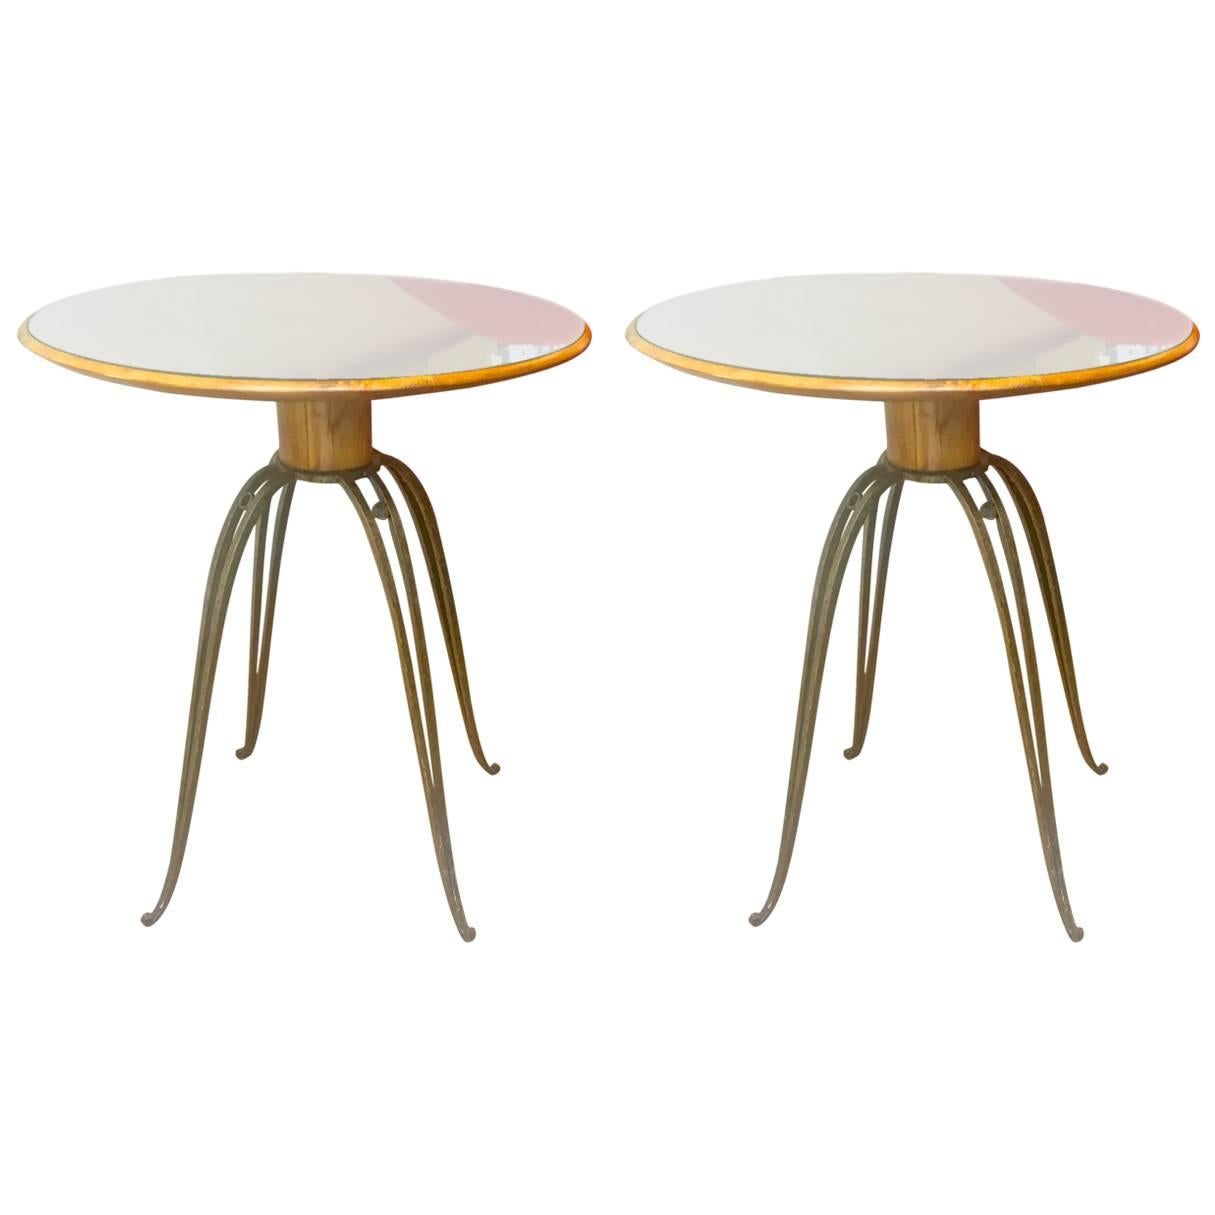 Rene Prou Rare Refined Pair of Side Table in Sycamore and Gold Leaf Wrought Iron For Sale